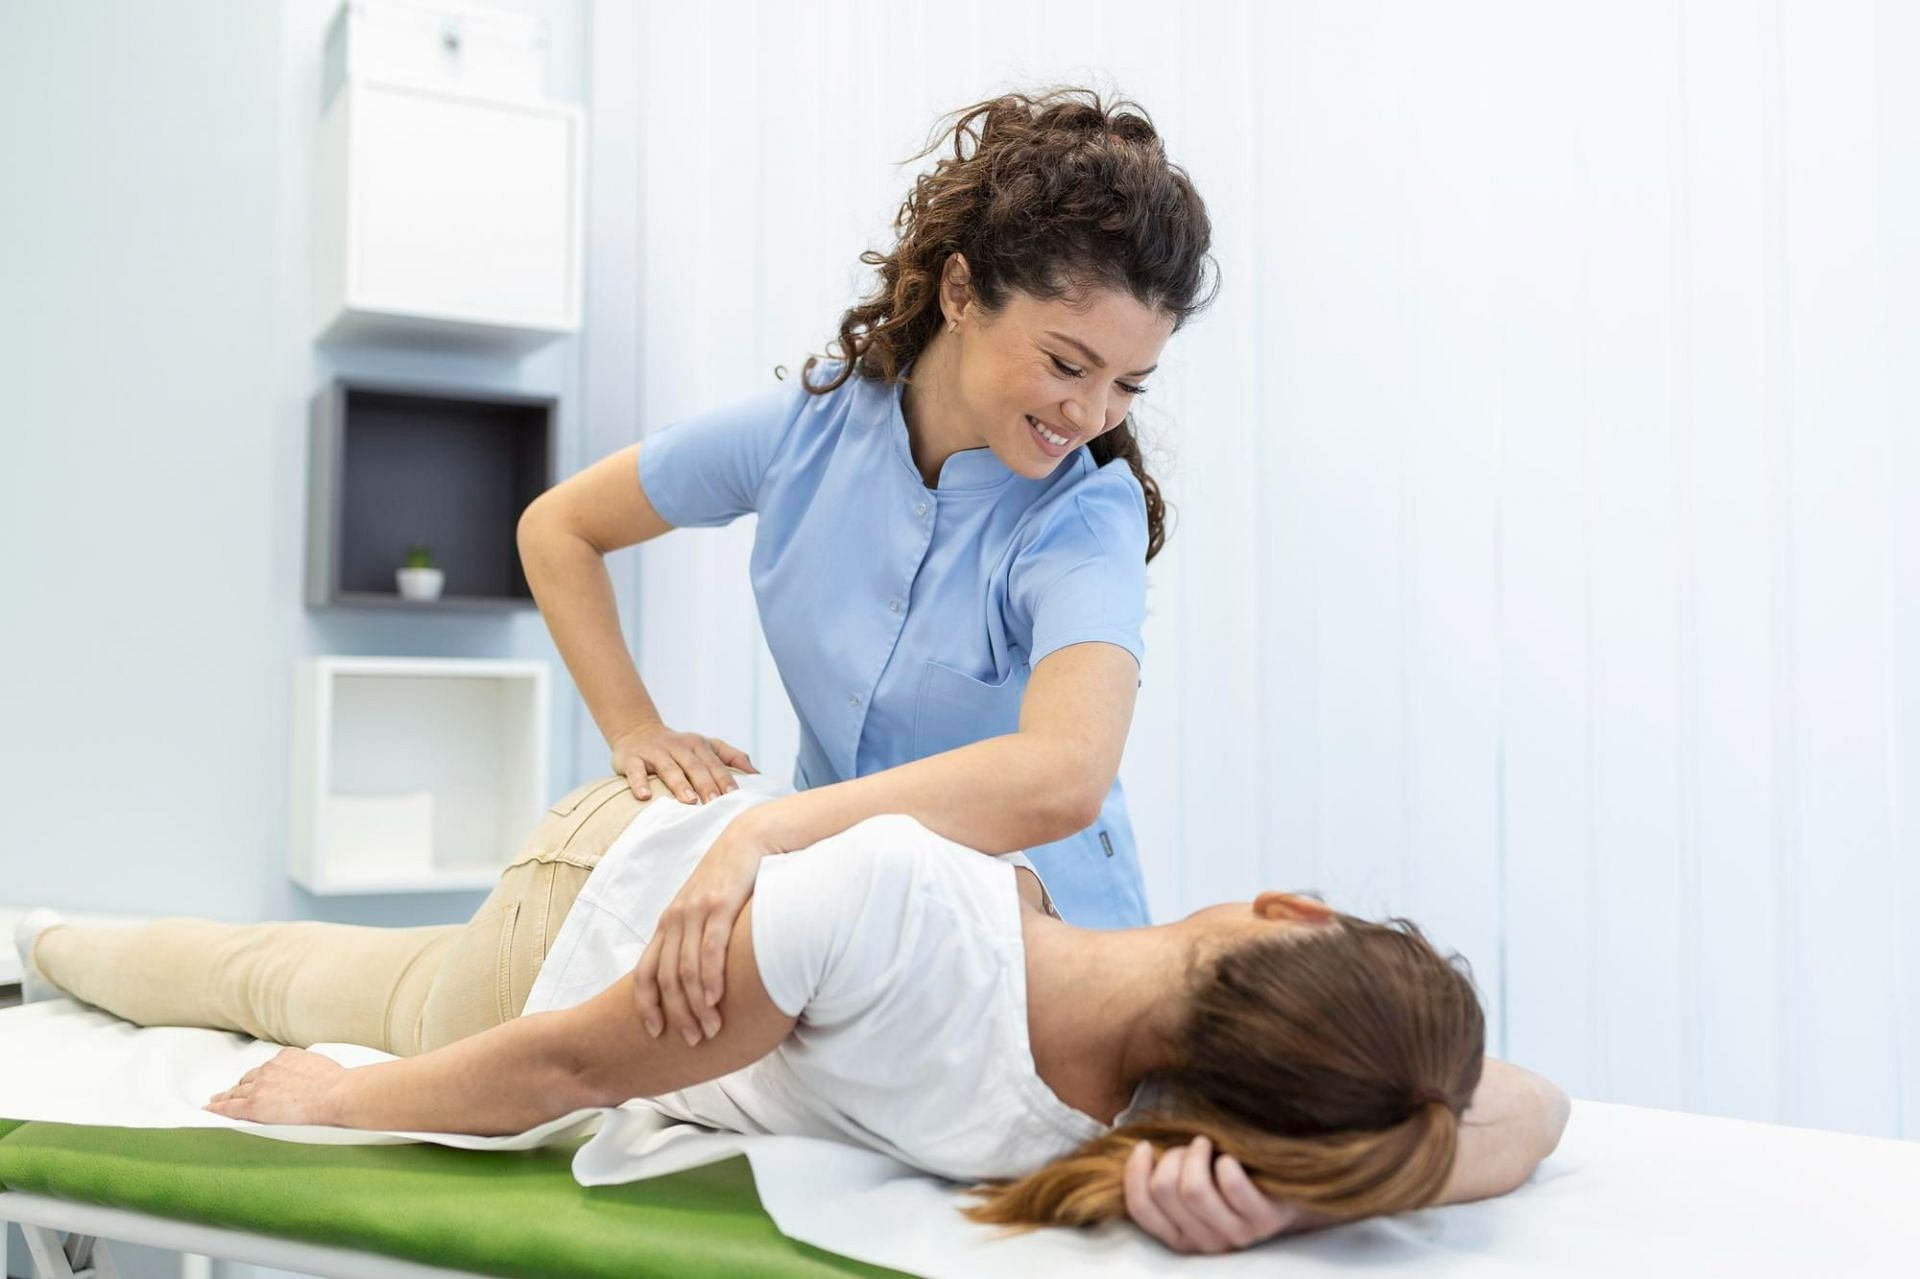 Physiotherapy can help in straightening the abductor hip muscles (Image by stefamerpik on Freepik)